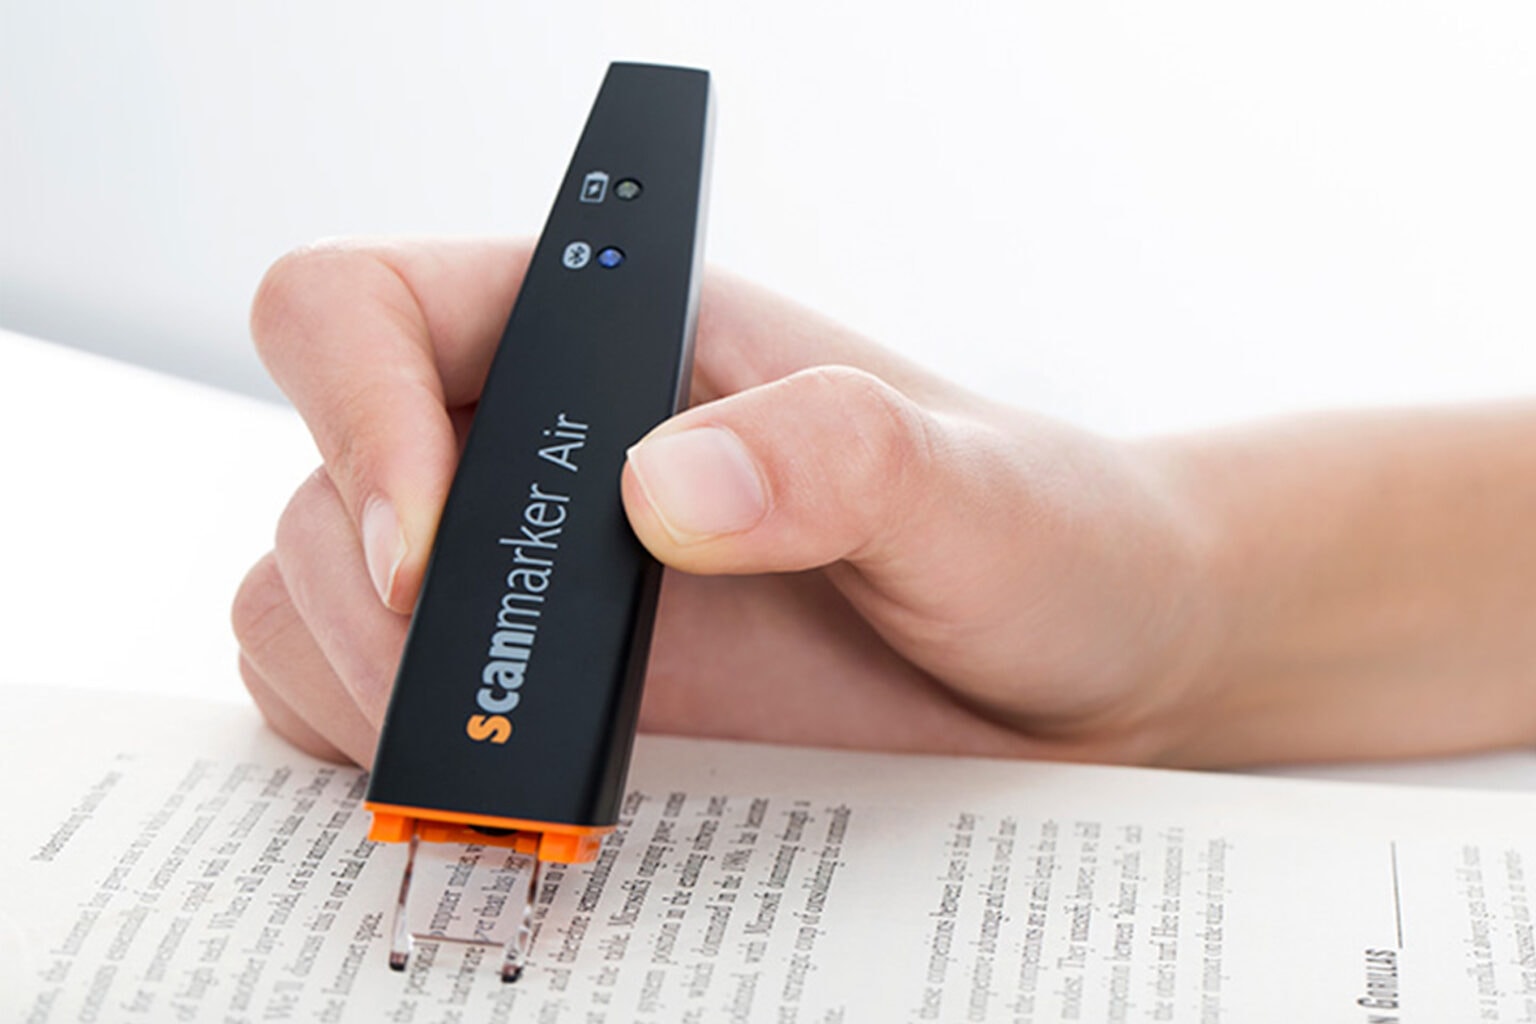 This OCR scanning pen copies text straight to your Mac and iPhone